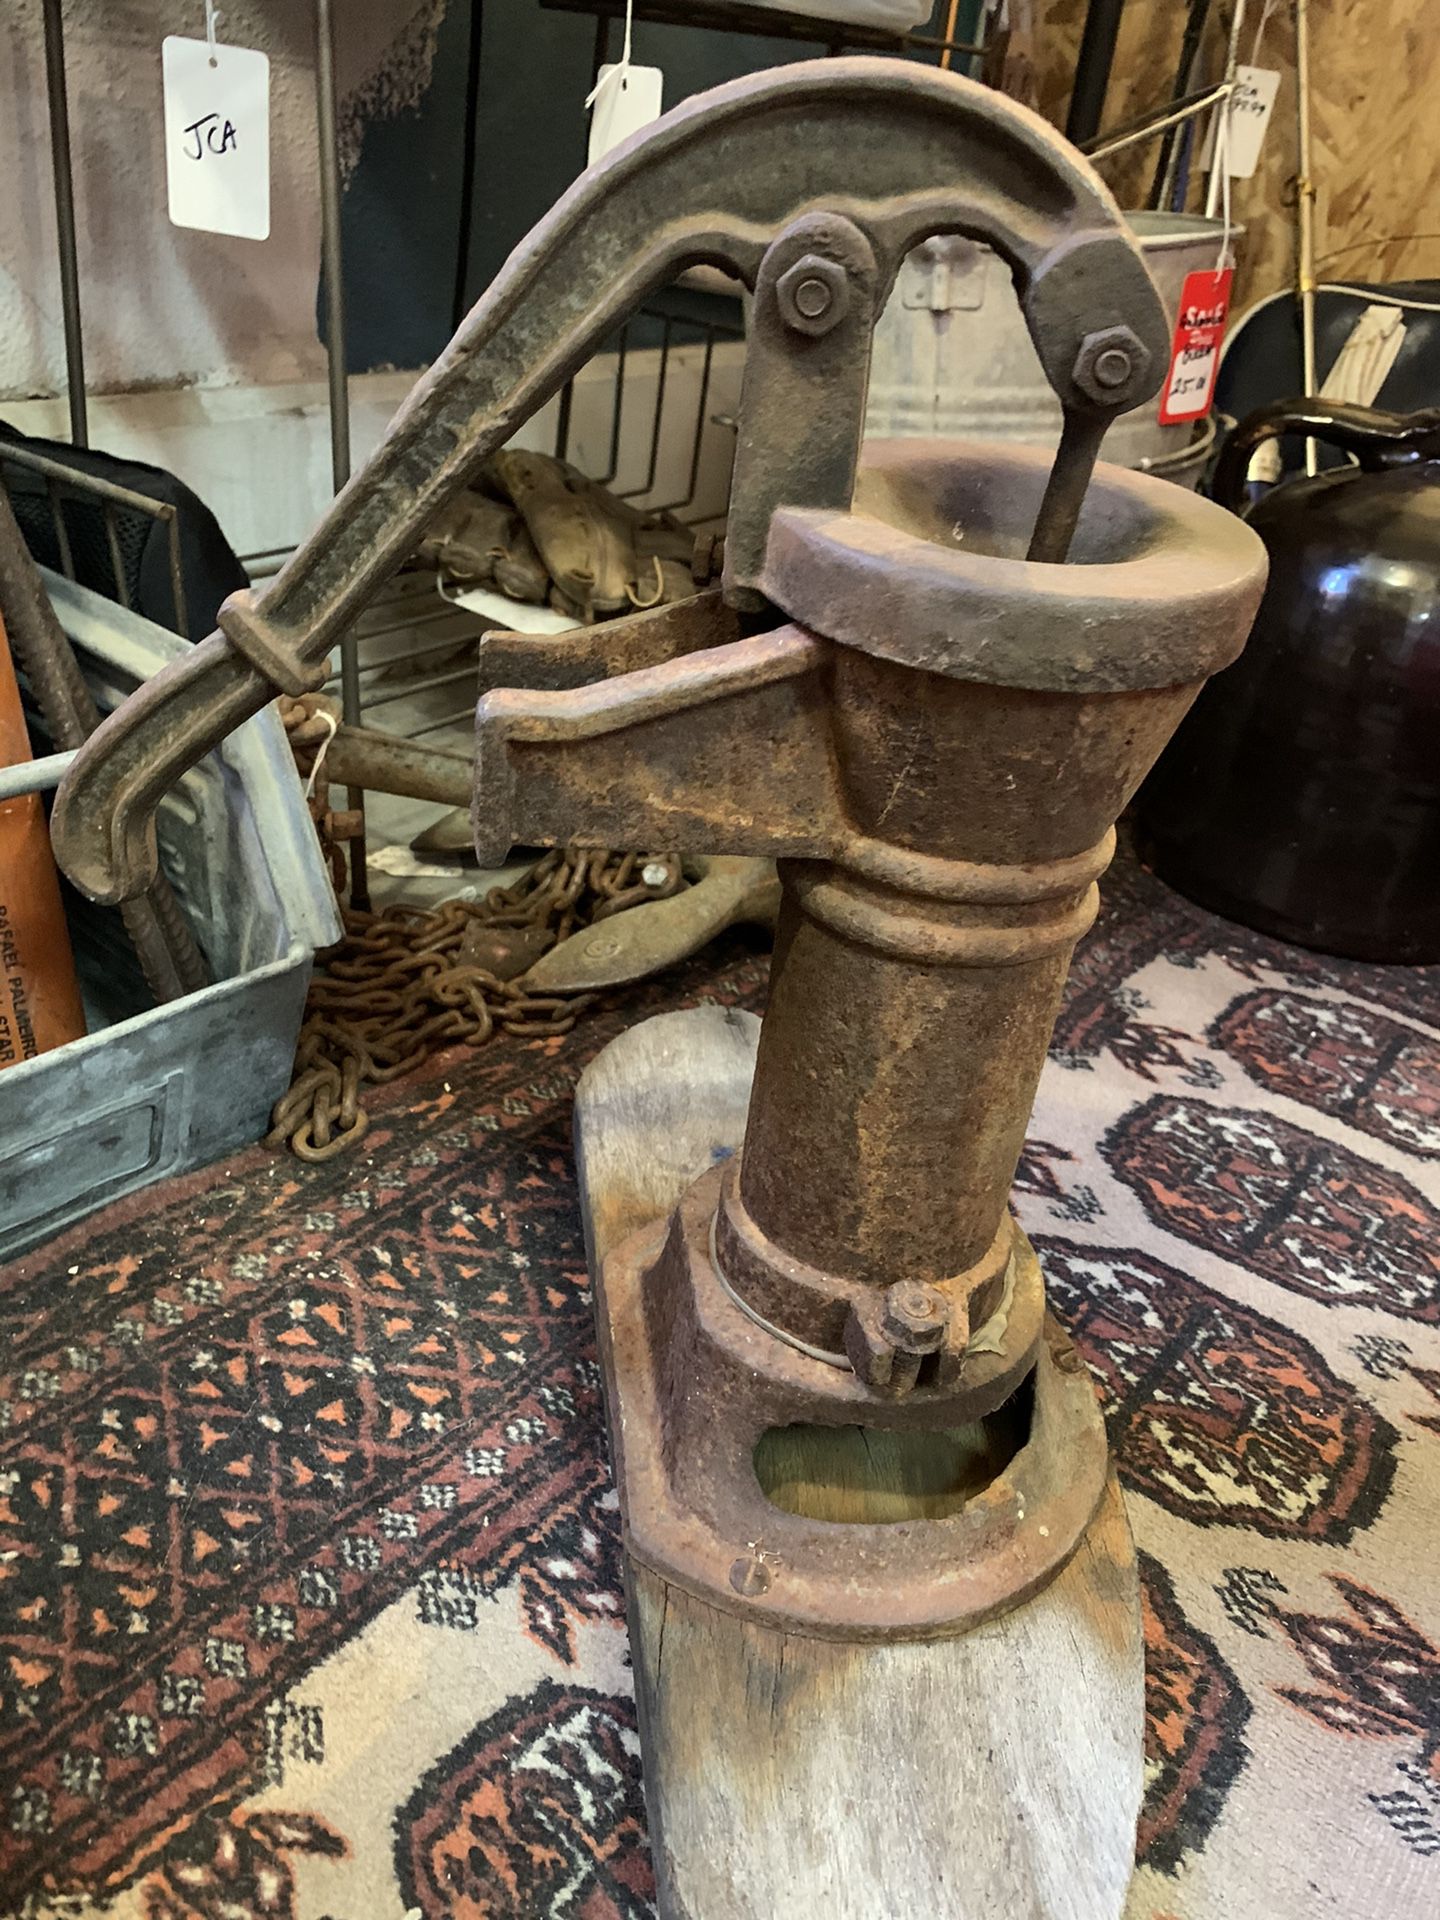 Antique vintage cast iron 1920s or older water pump. Authentic genuine. 99.00. 😀Johanna 212 north Main Street buda furniture collectibles vintage to